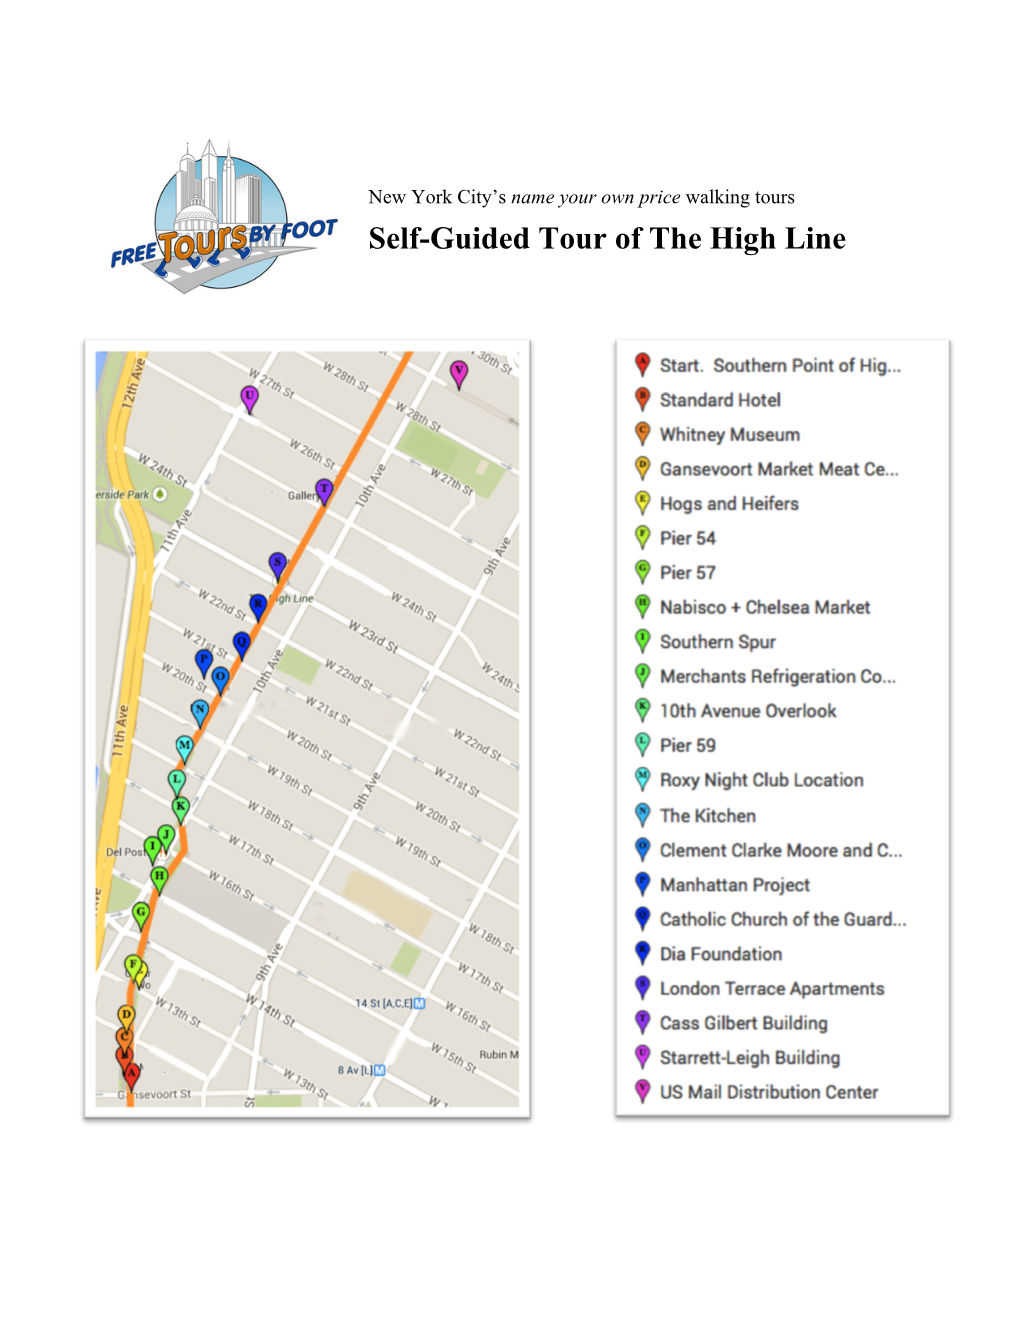 Self-Guided Tour of the High Line